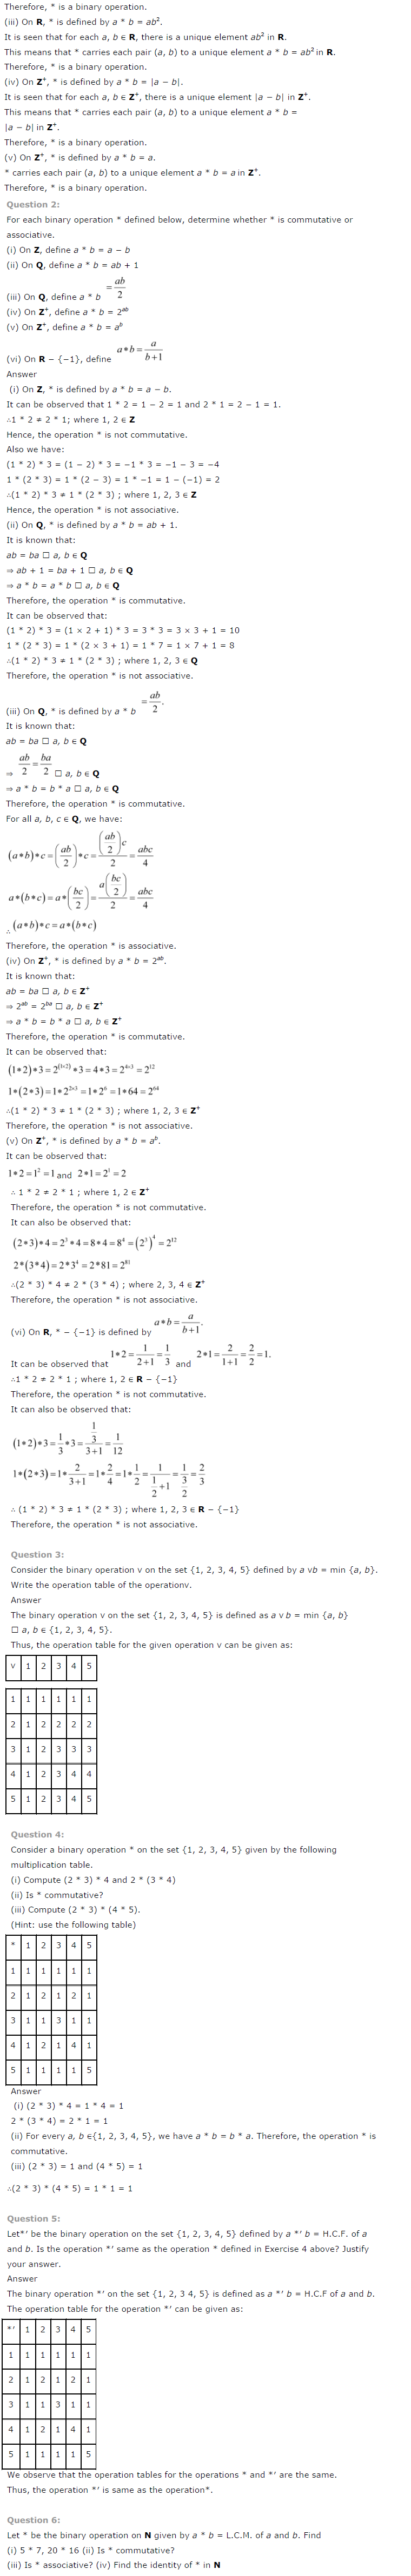 NCERT Solutions For Class 12 Maths Chapter 1 Relations and Functions 8